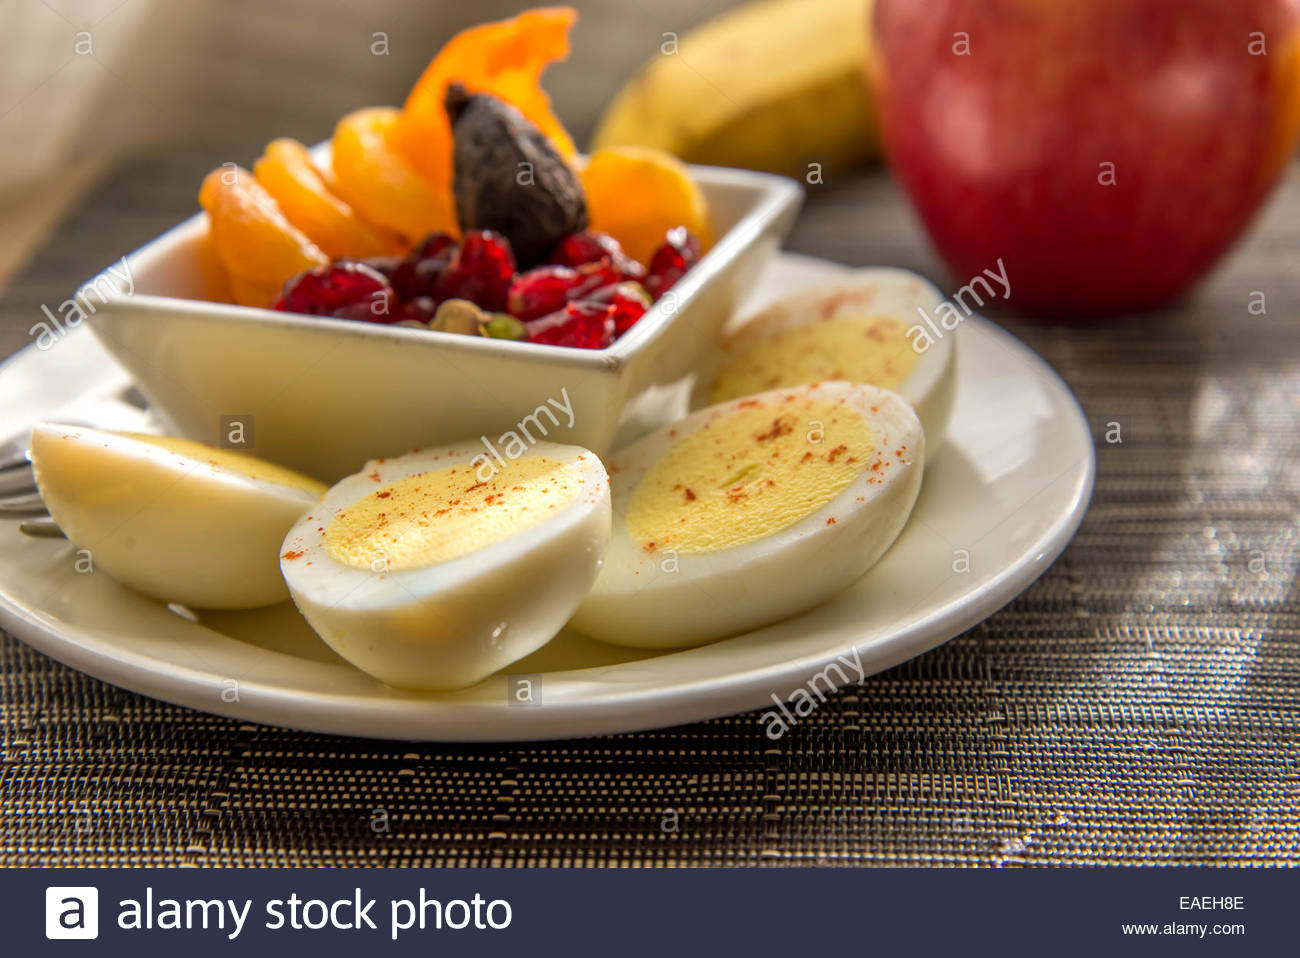 Healthy Breakfast With Boiled Eggs
 Sliced hard boiled eggs and fruit healthy breakfast Stock